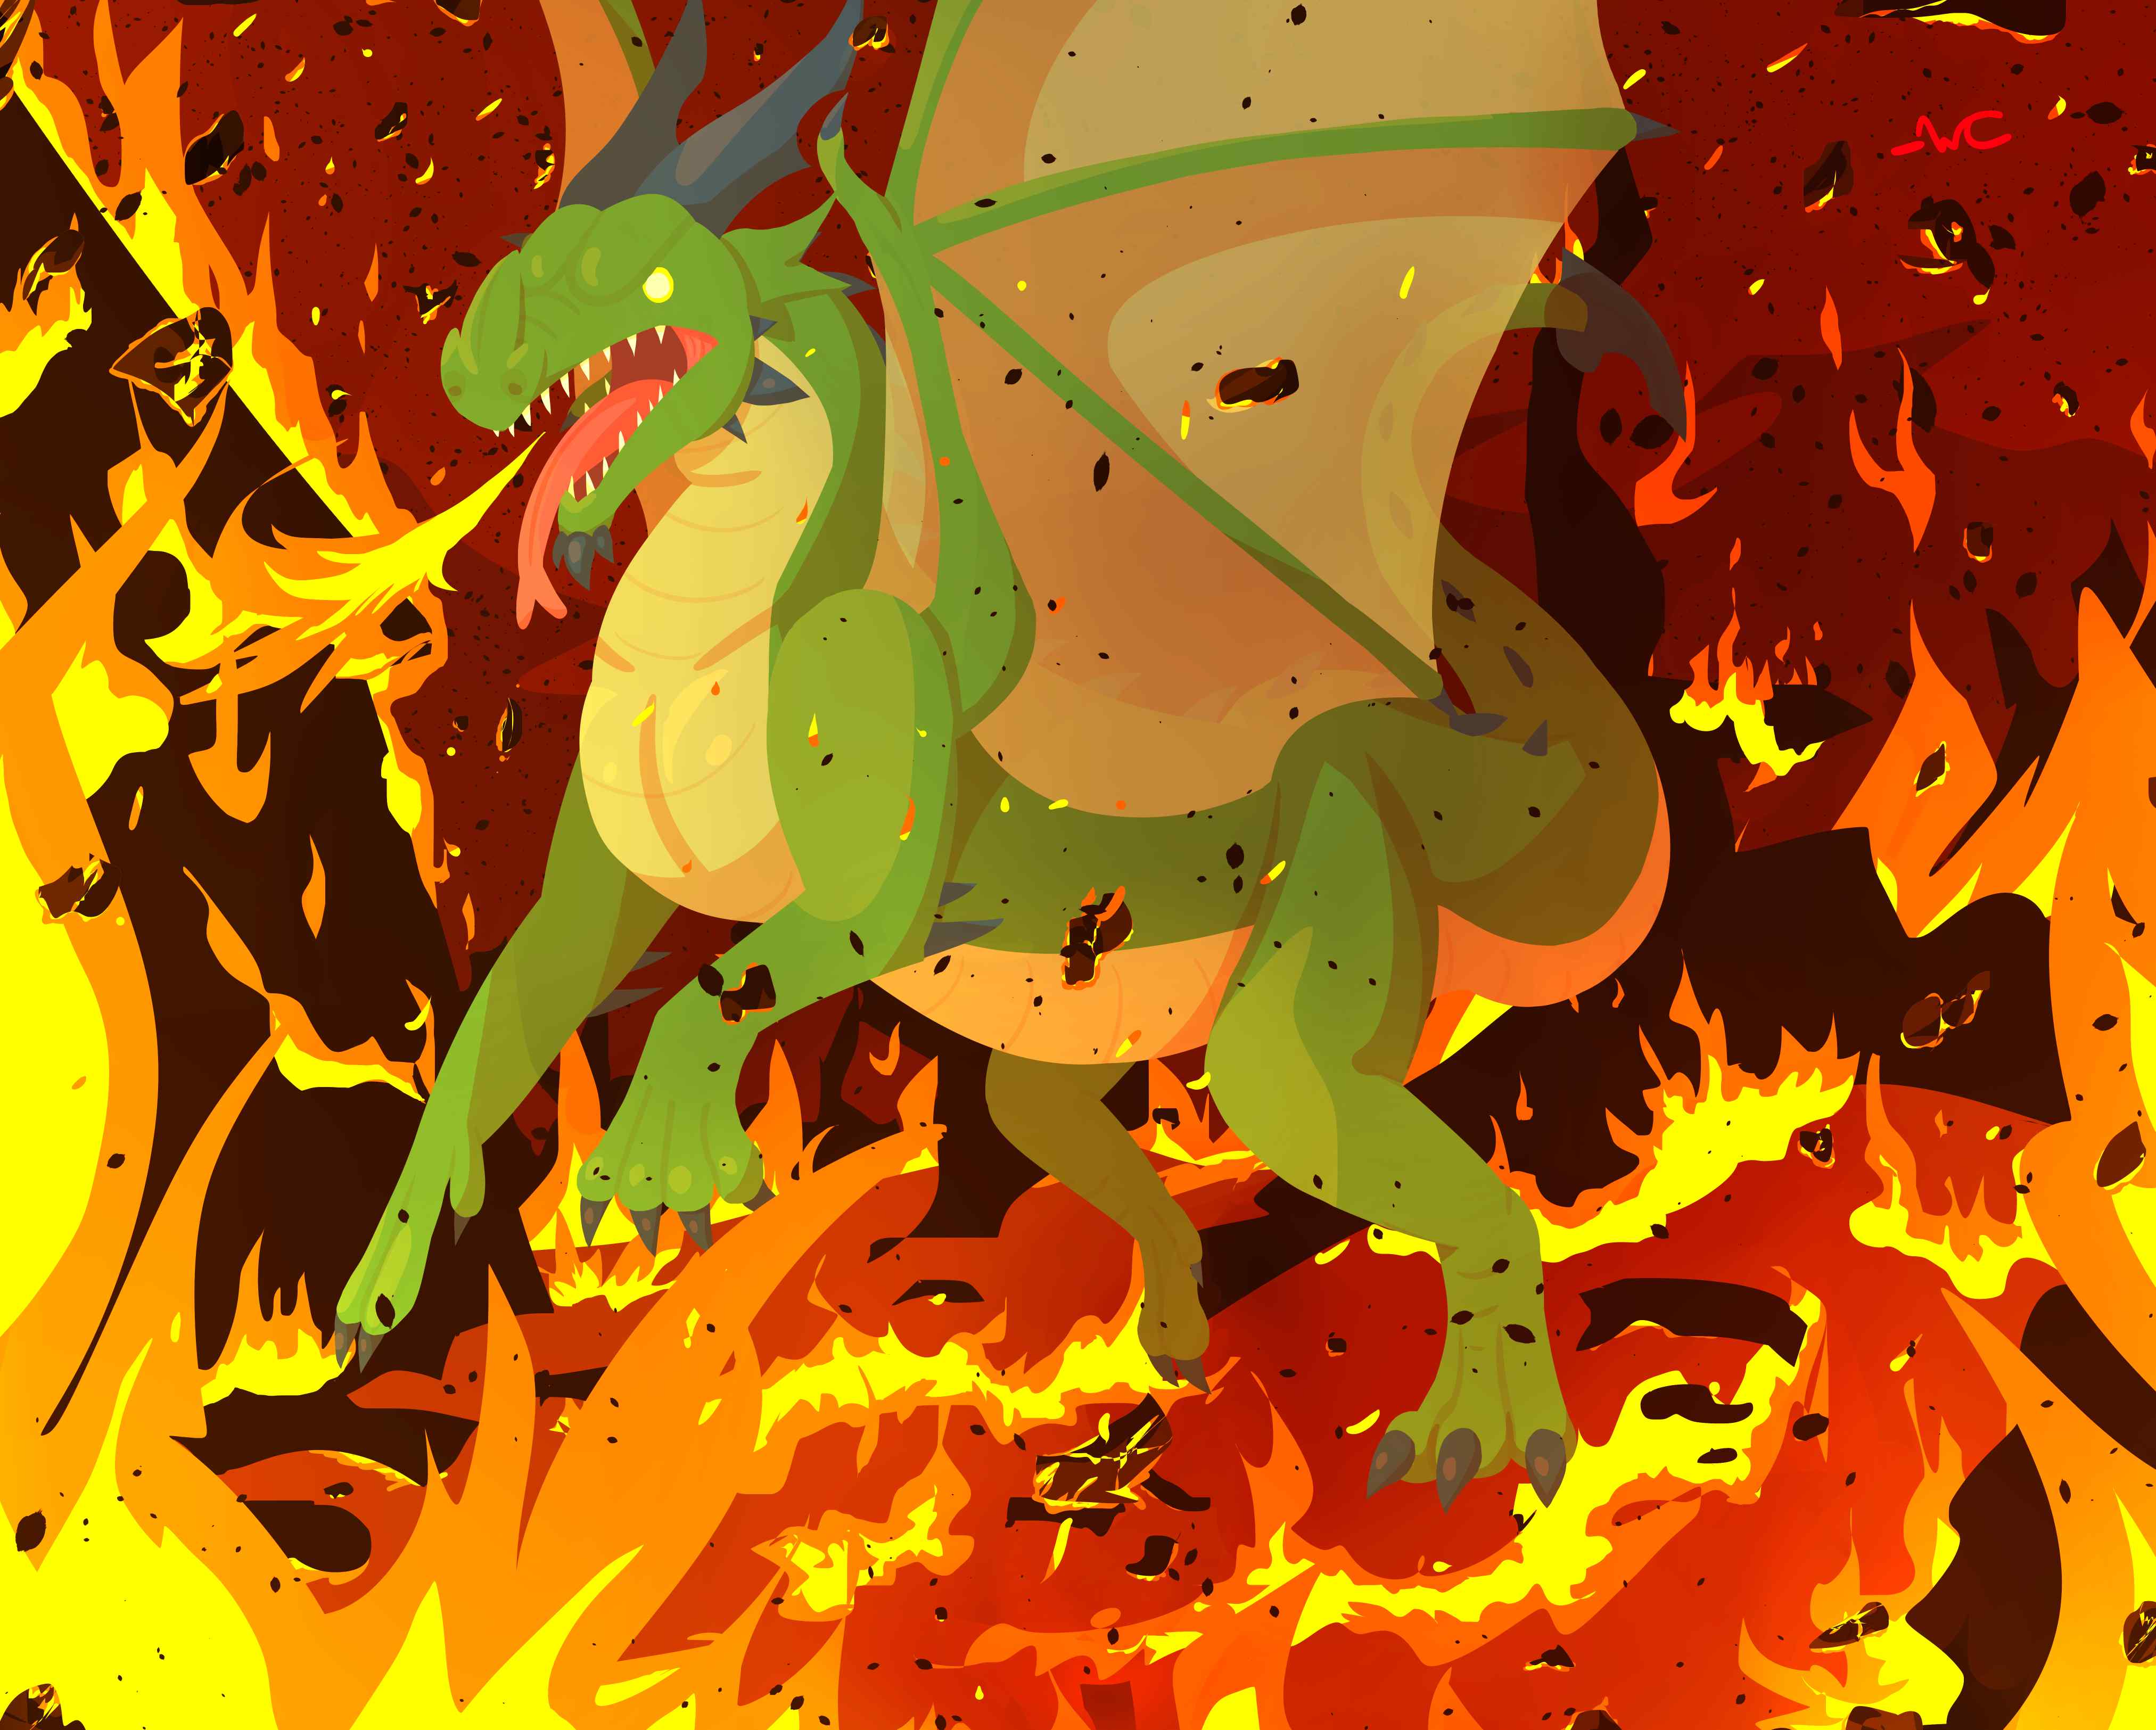 A lineless digital piece of a green dragon breathing fire and rampaging through a burning village.